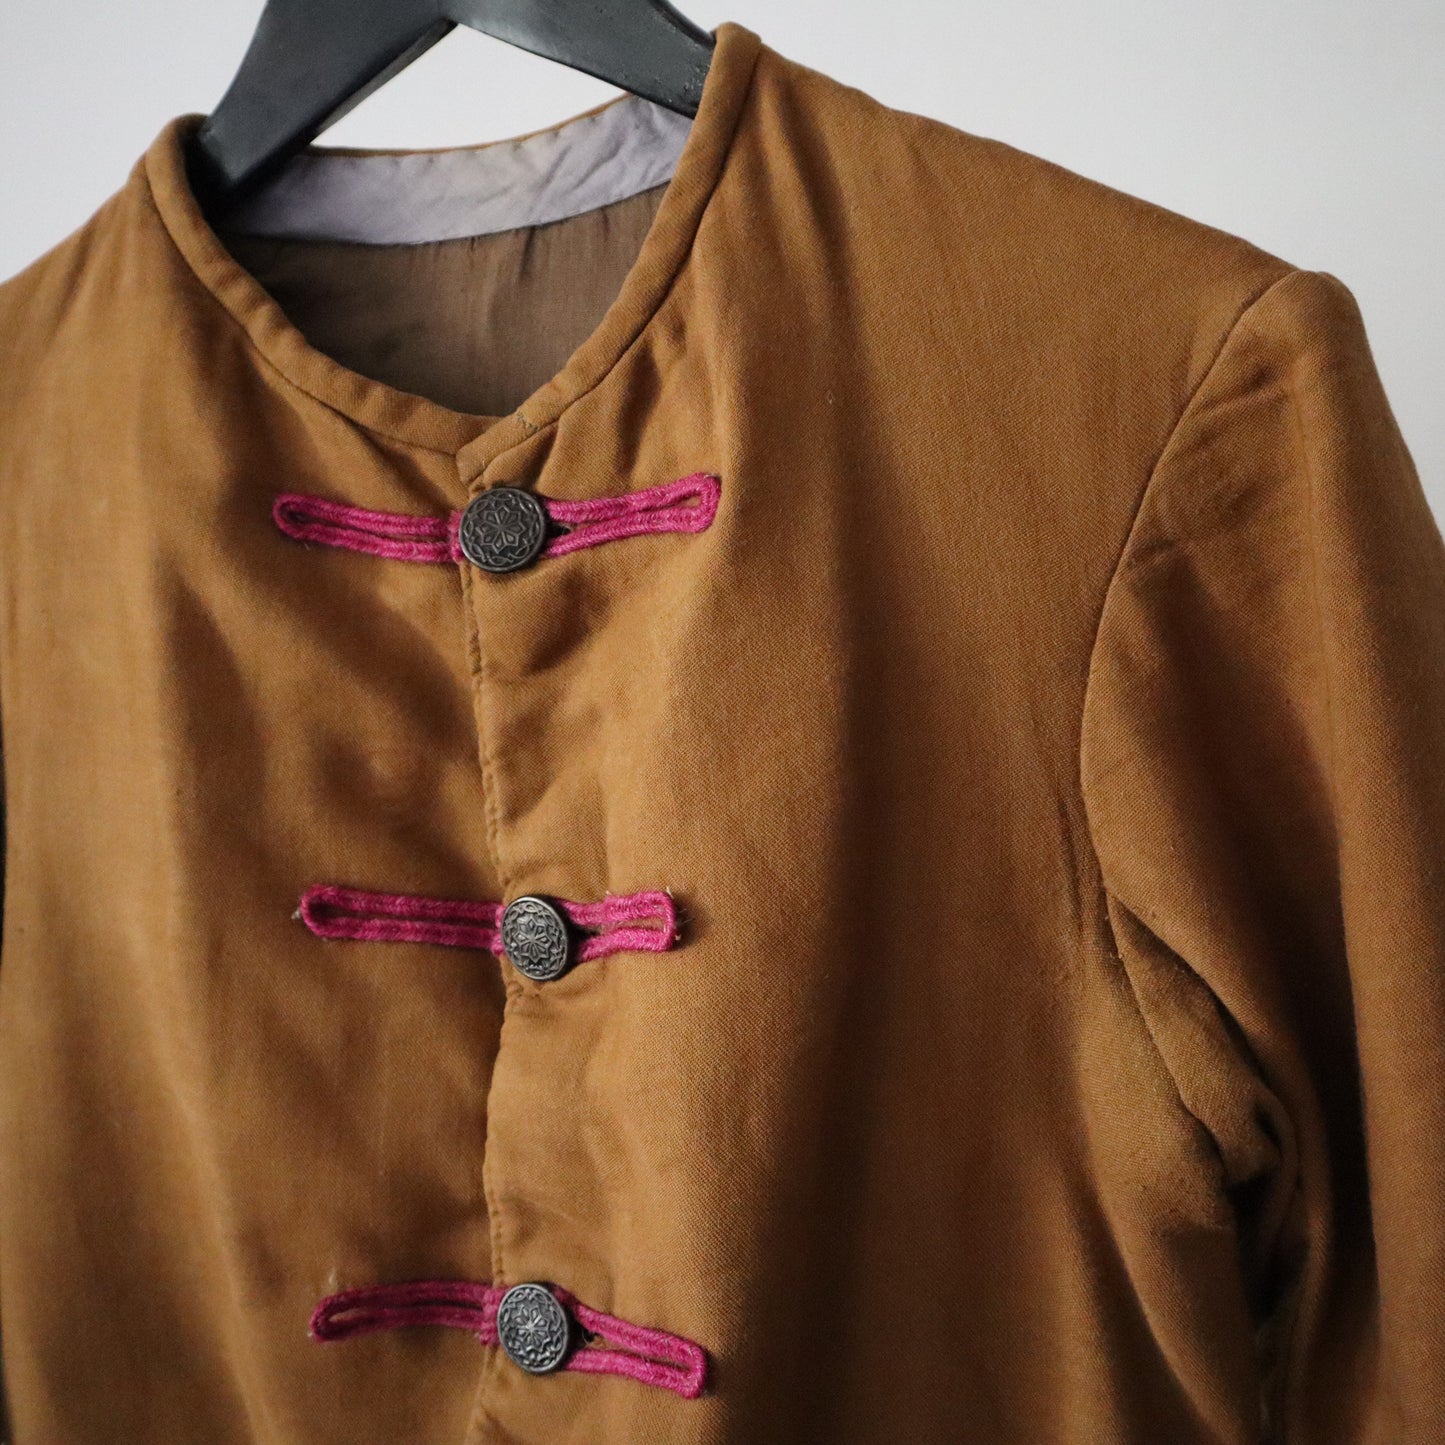 Antique French Theatre Costume Jacket Cotton Wool Magenta Trim Embossed Metal Buttons 18th Century Style Frock Coat